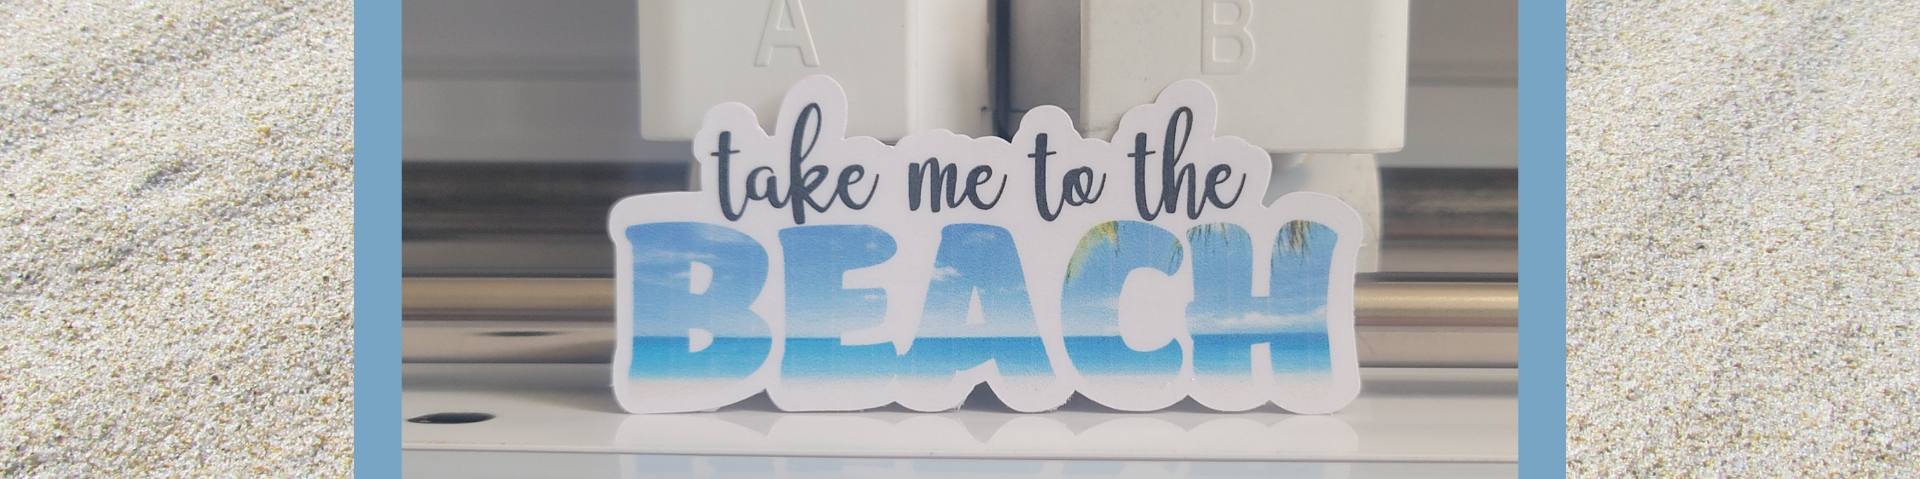 How to Fill in Text with an Image // Cricut Design Space Tutorial